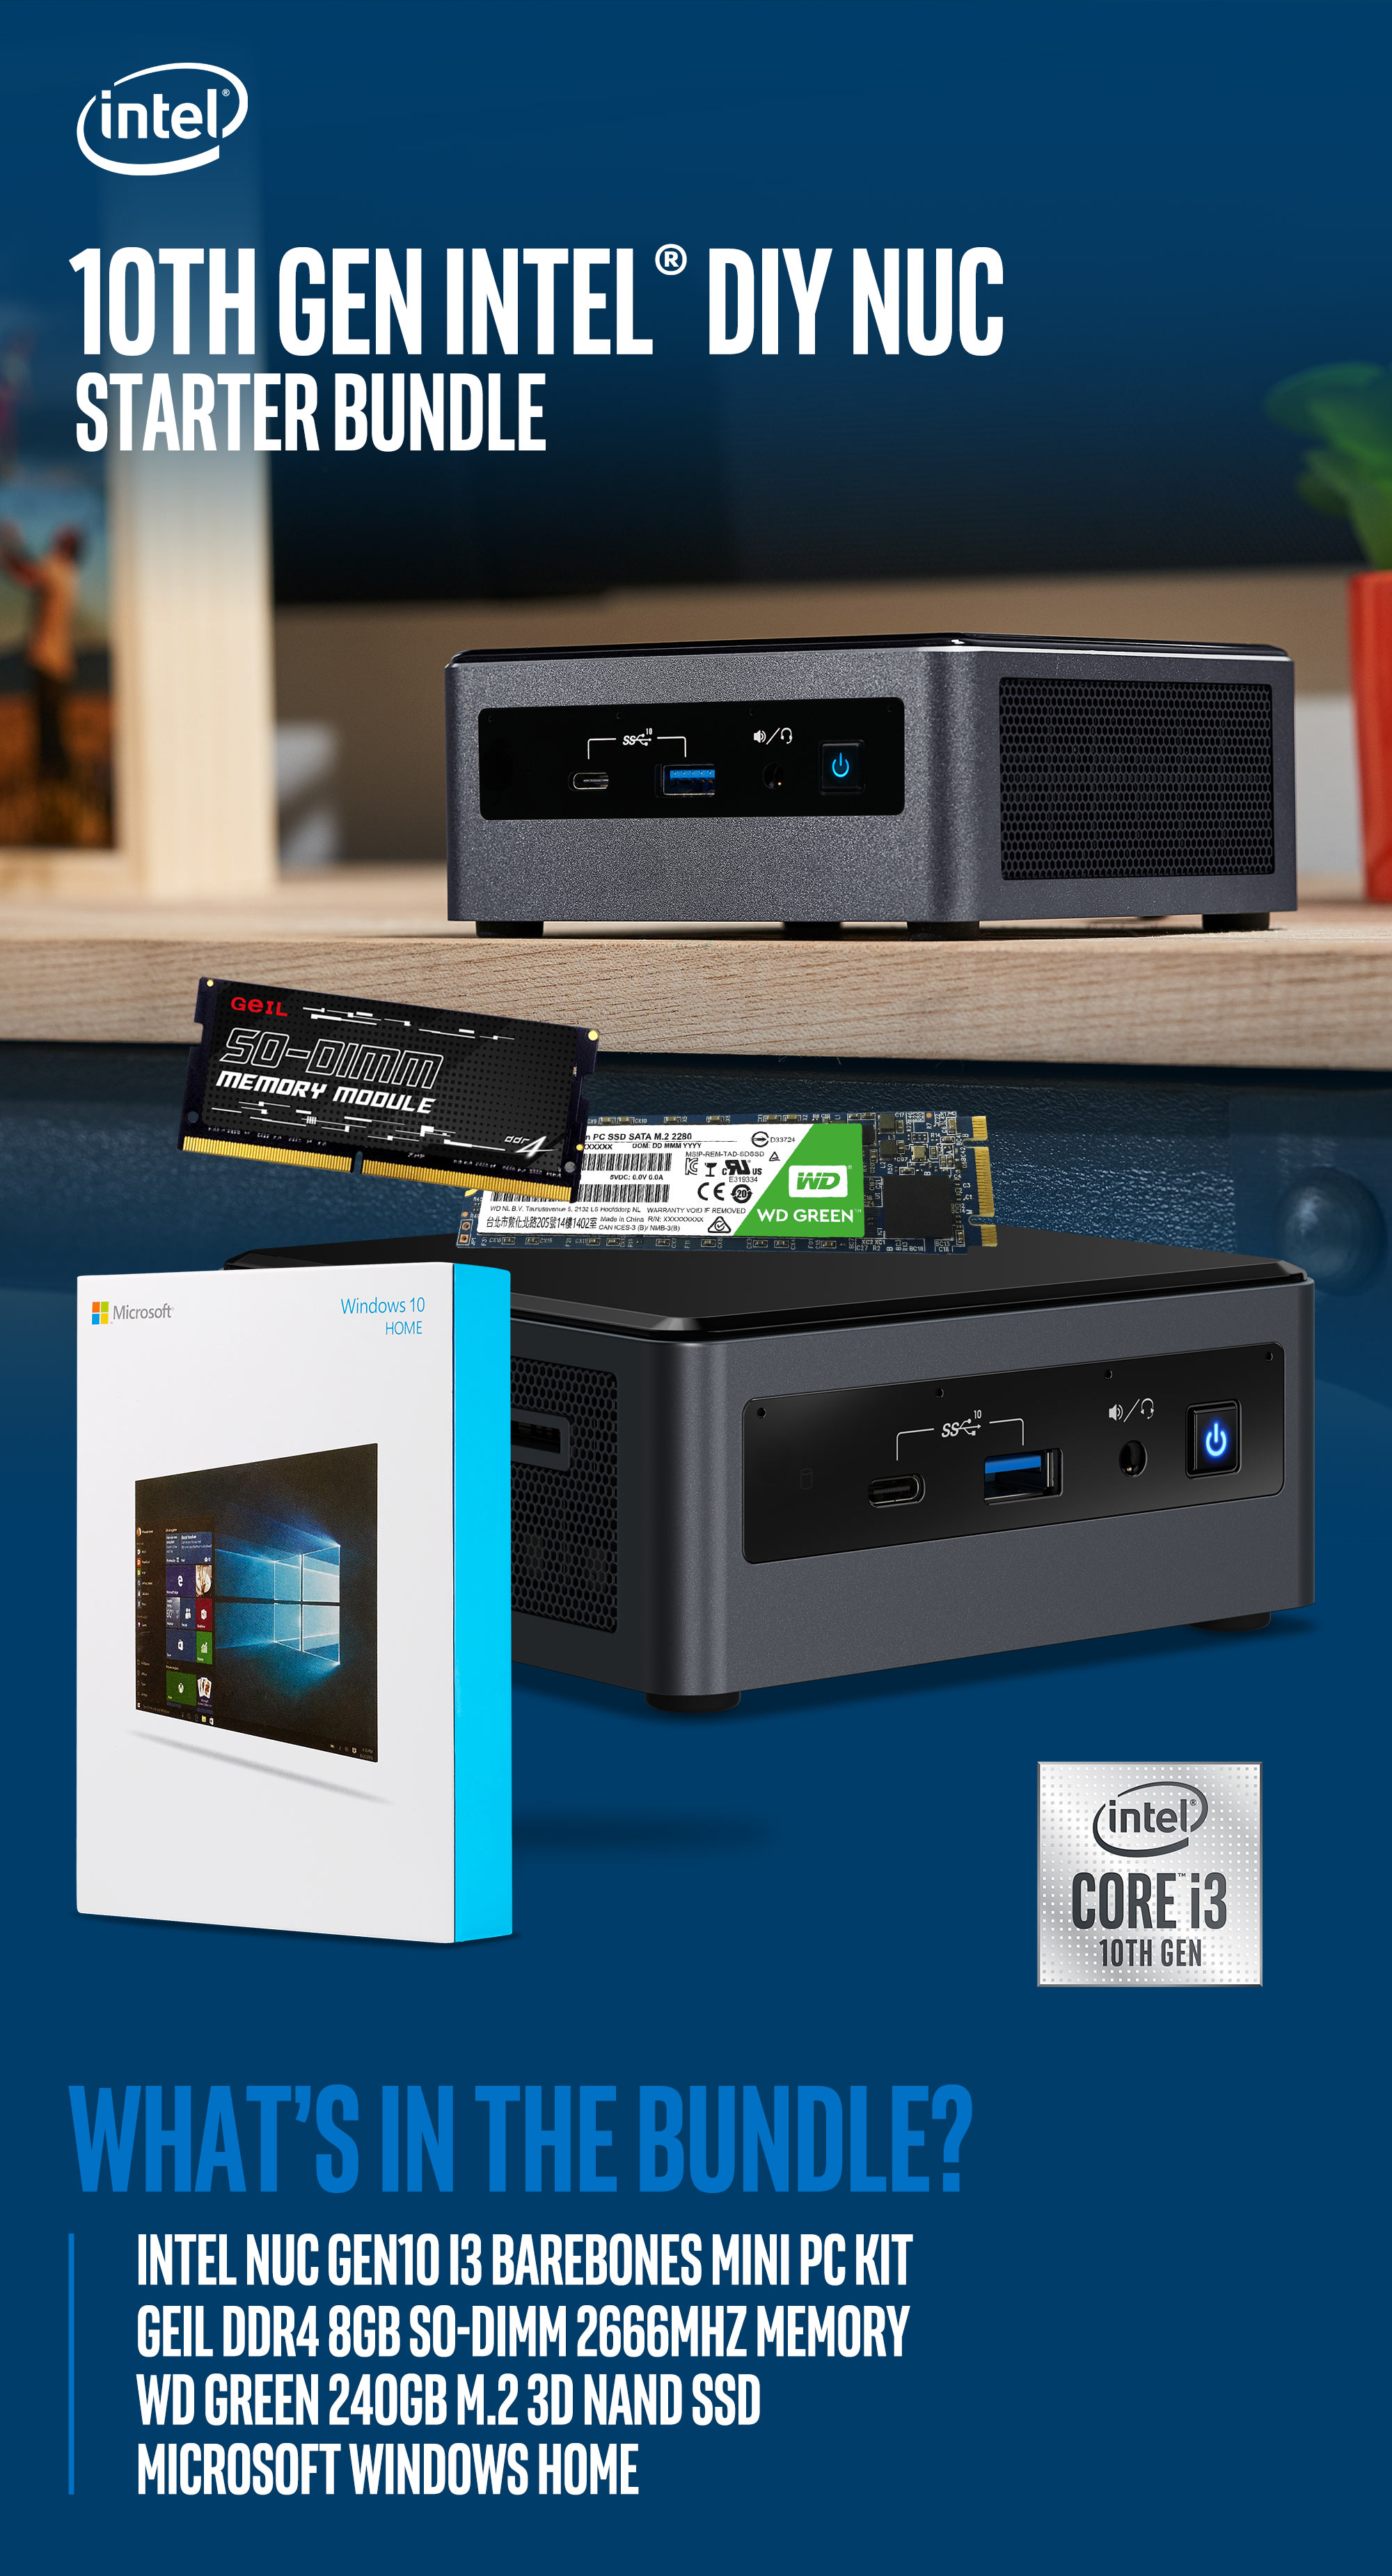 A large marketing image providing additional information about the product Intel 10th Gen i3 NUC DIY Starter Bundle - Additional alt info not provided